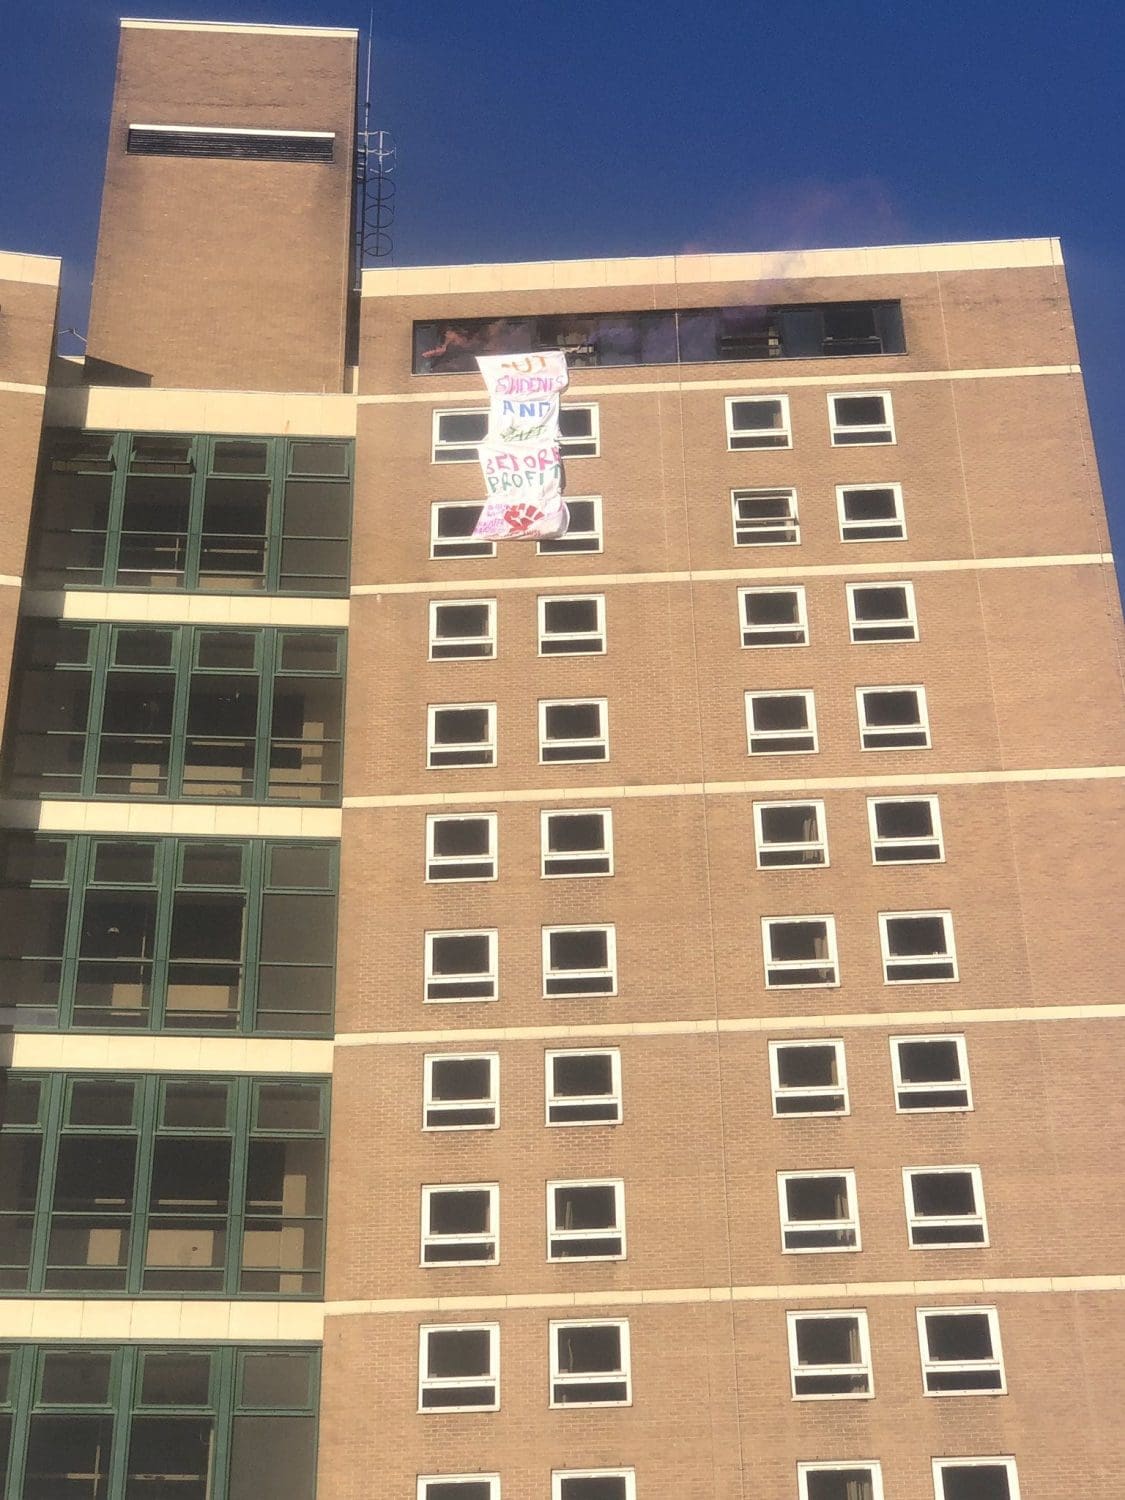 A protest banner hanging outside of an occupied student building